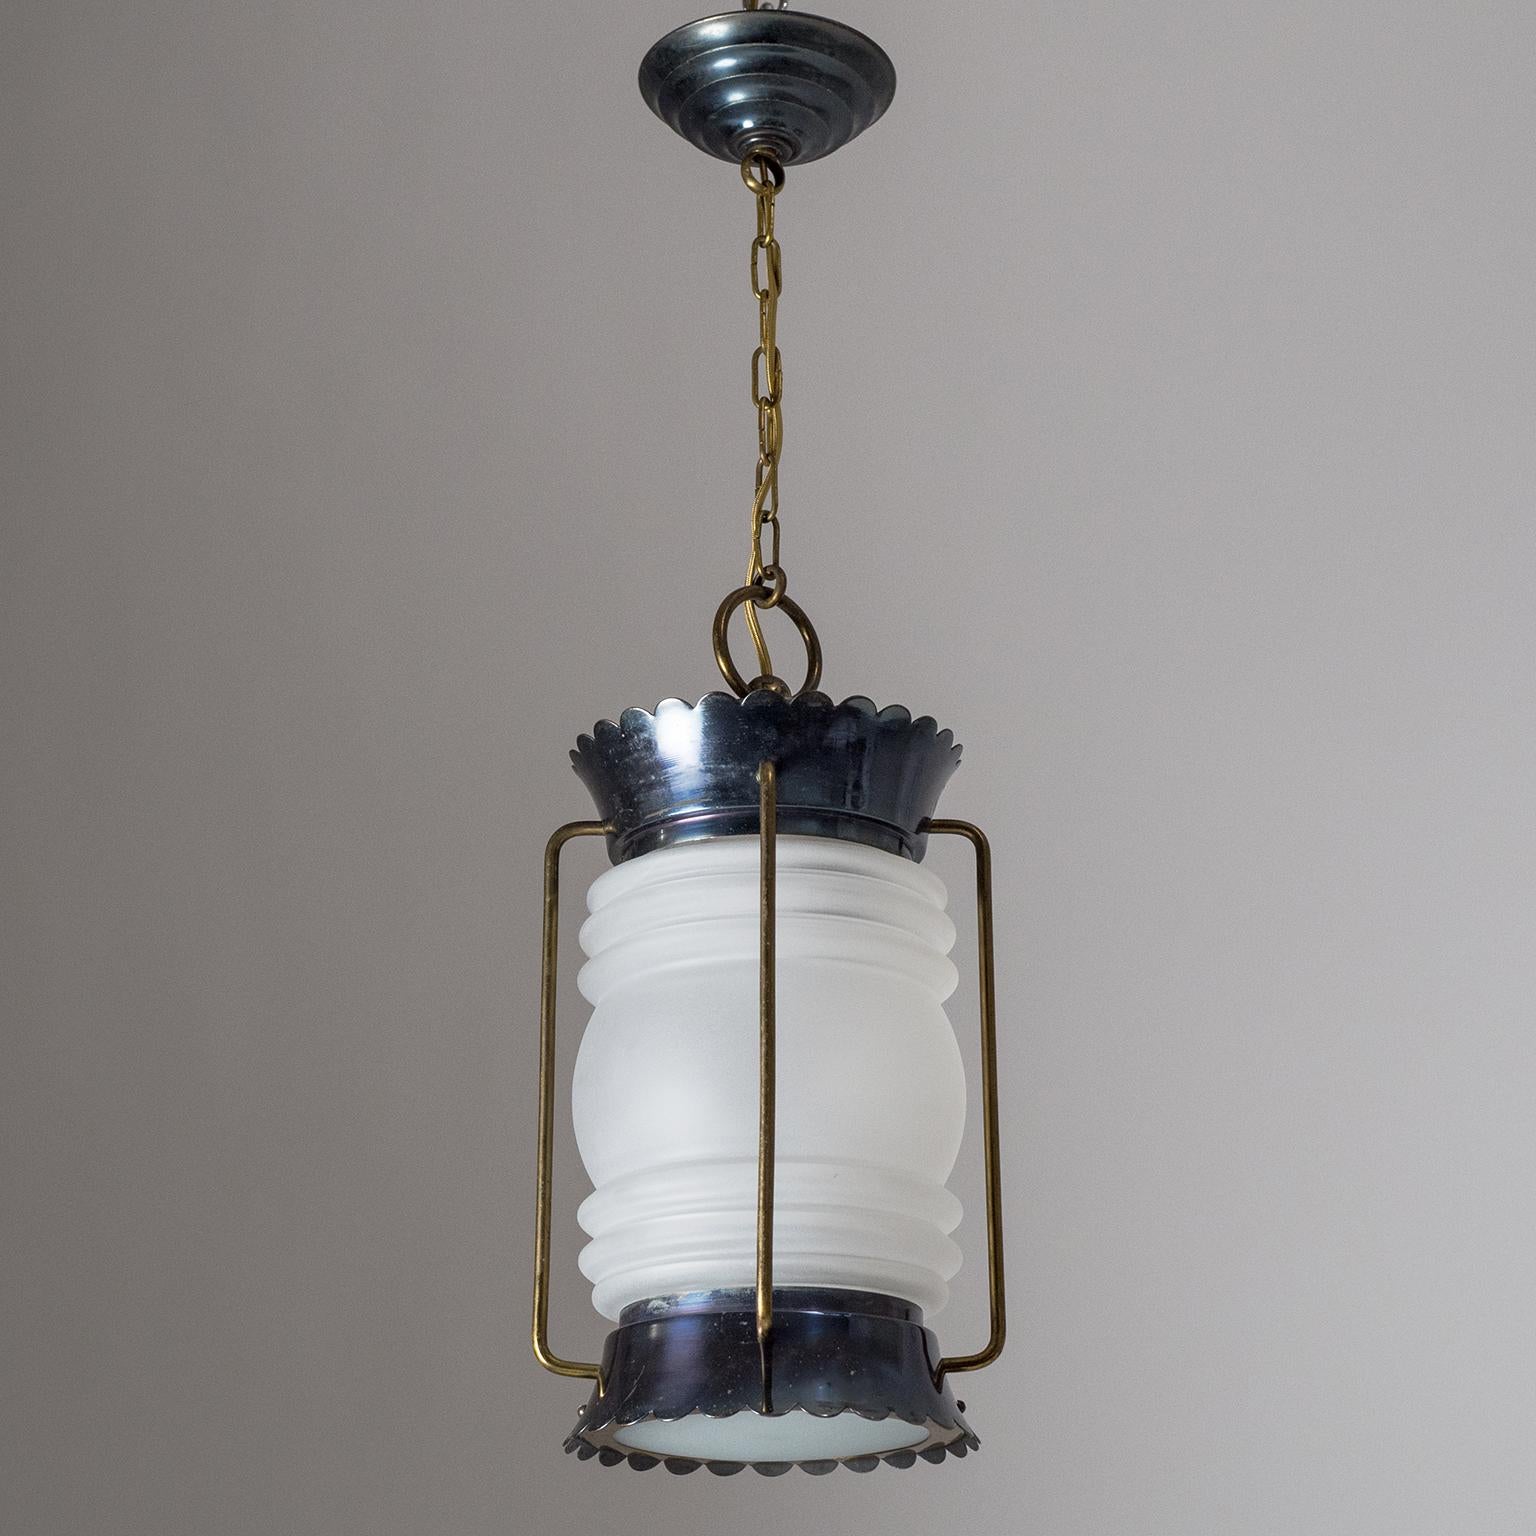 Superb French midcentury lantern taking a modernist approach to marine-style lighting. The hardware is made entirely of brass with the canopy and the scalloped top an bottom parts patinated very darkly with a slight purple tint. The fresnel glass